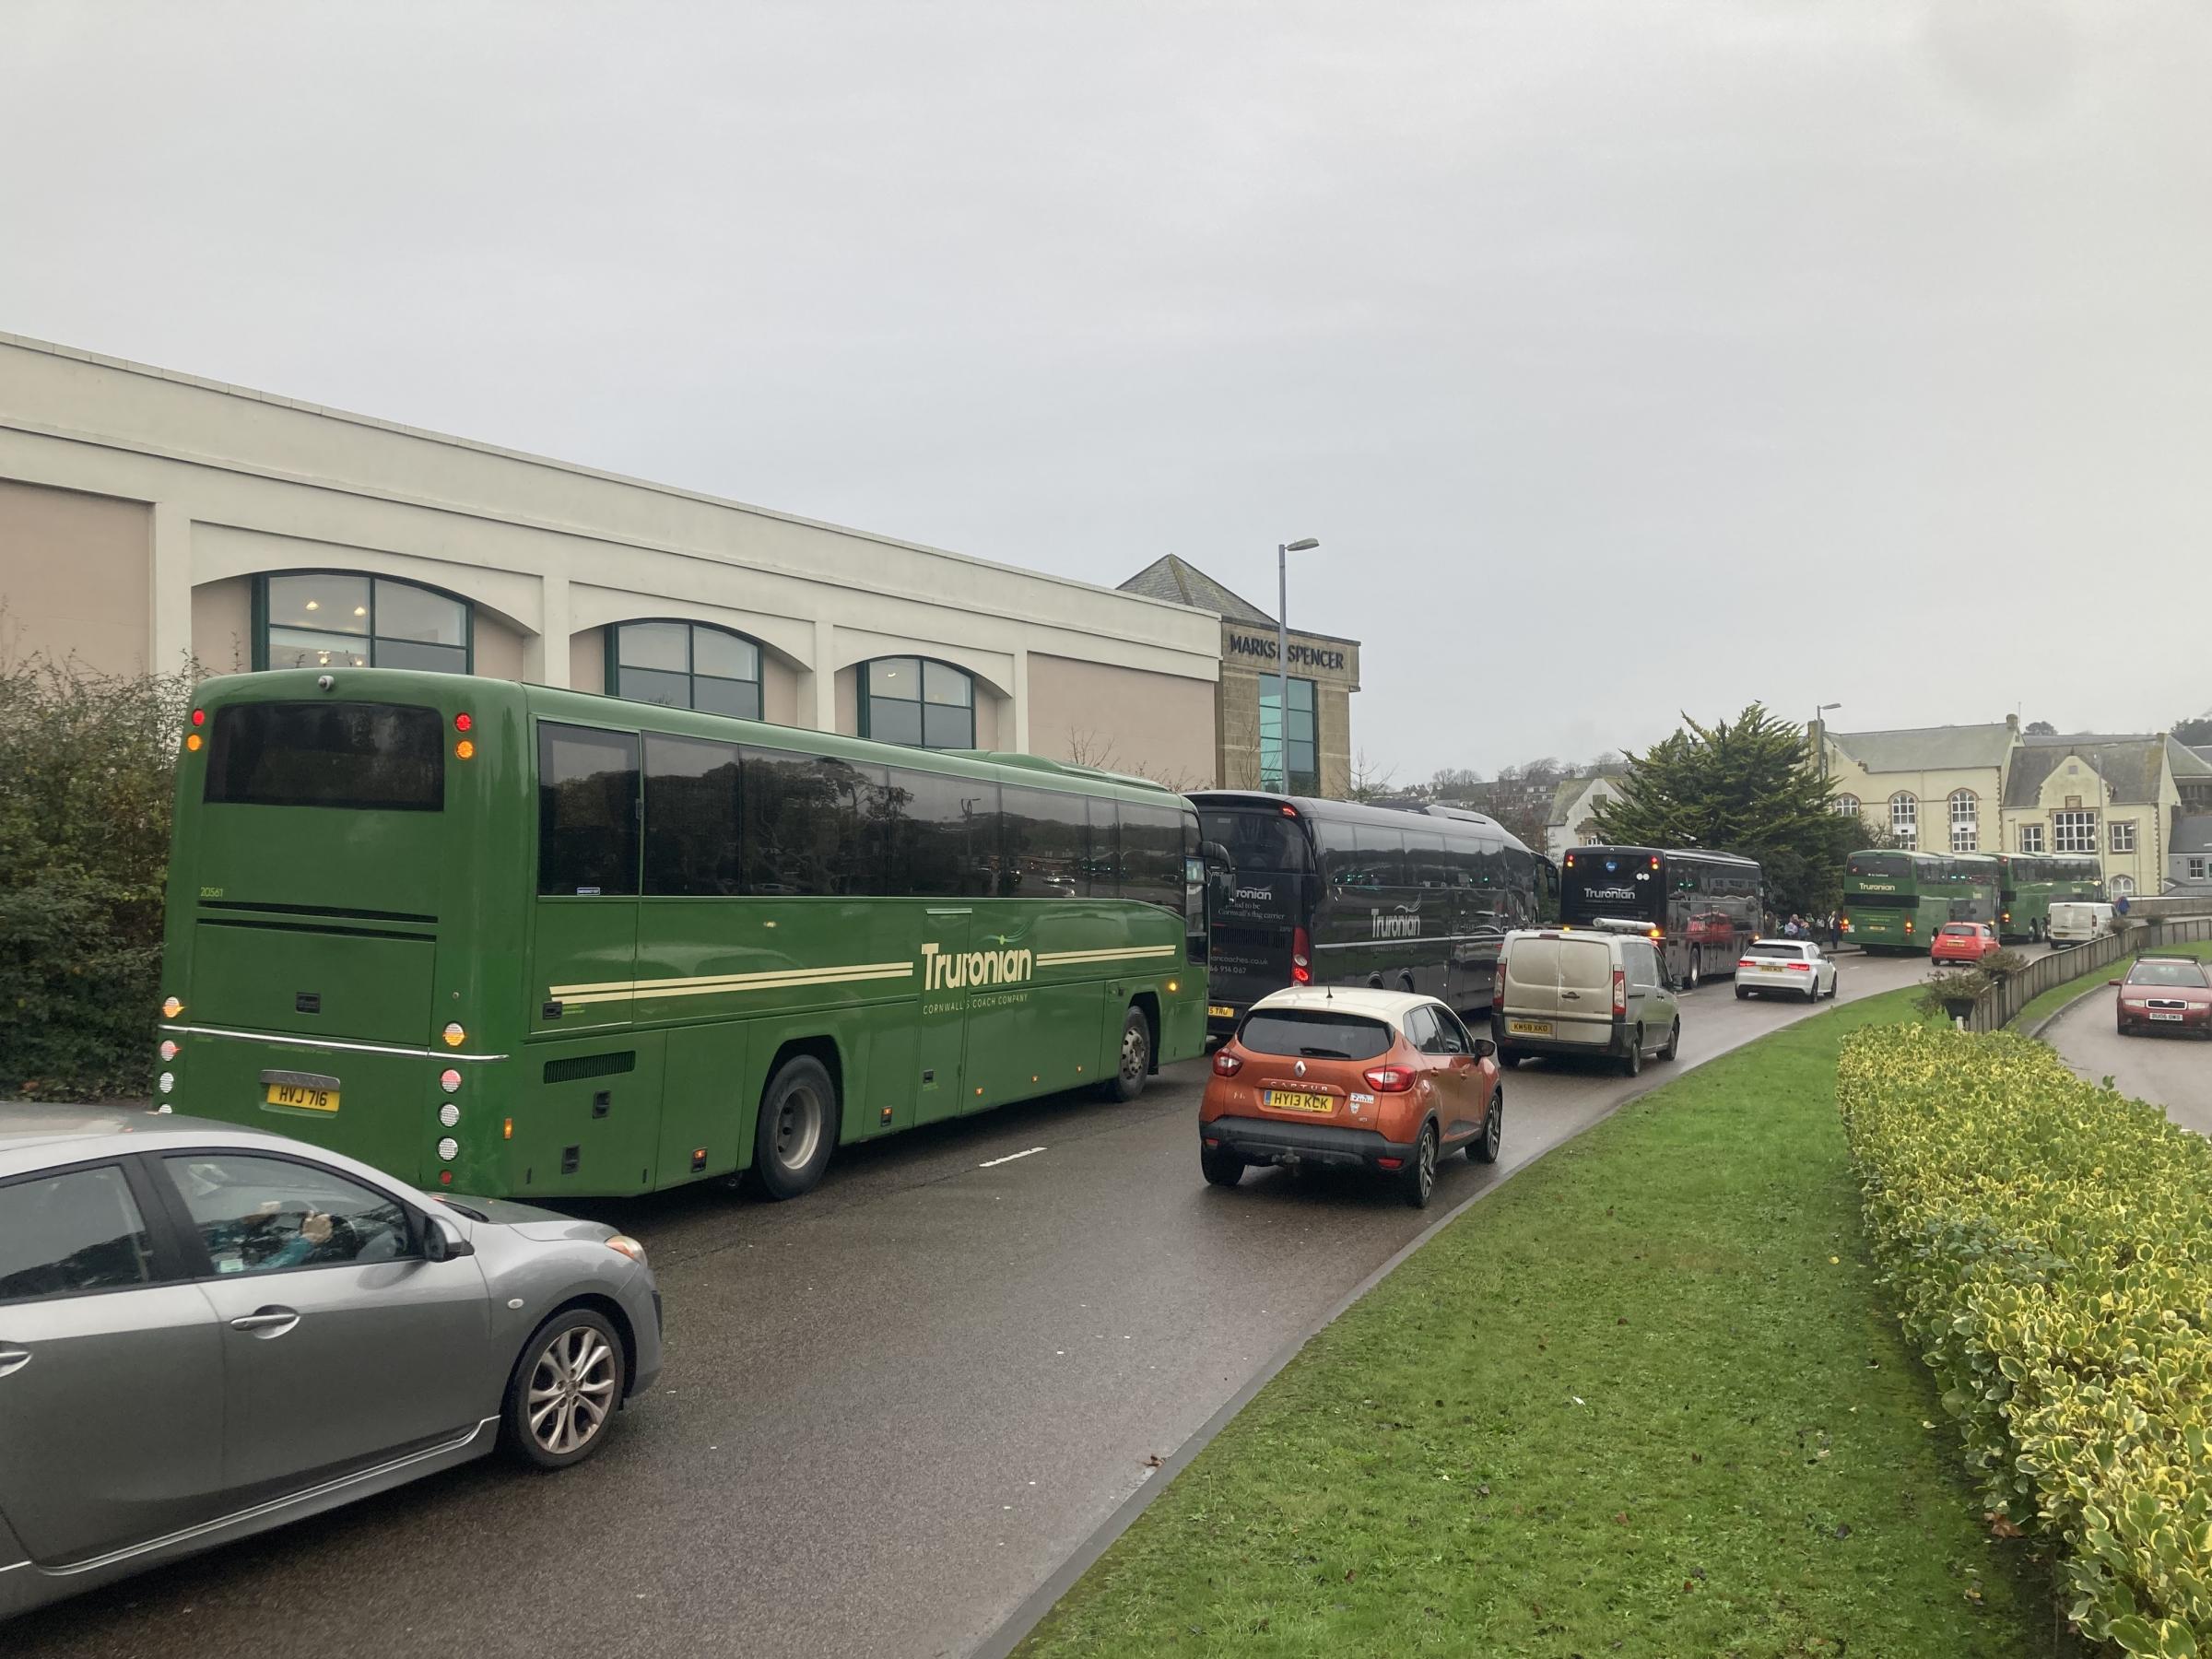 Coaches clogging the Morlaix Avenue dual carriageway after finding nowhere to park in the nearby coach park (Pic: submitted to LDRS)